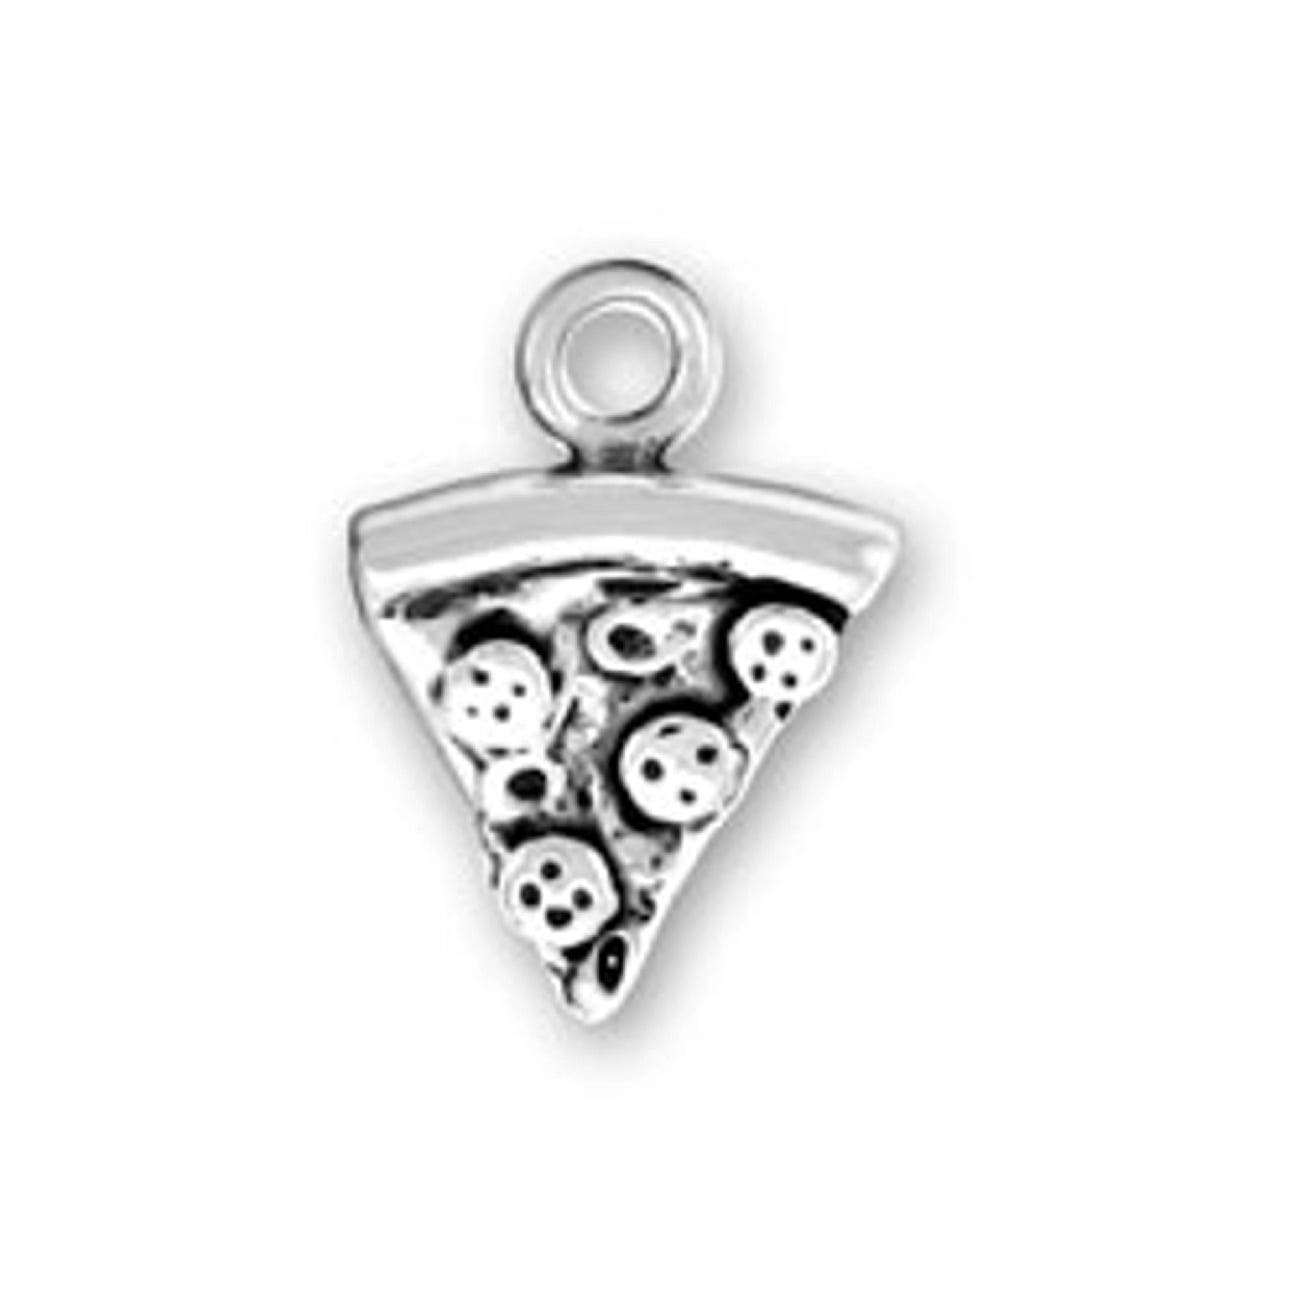 STERLING SILVER SLICE OF PEPPERONI PIZZA CHARM WITH BOX CHAIN NECKLACE 